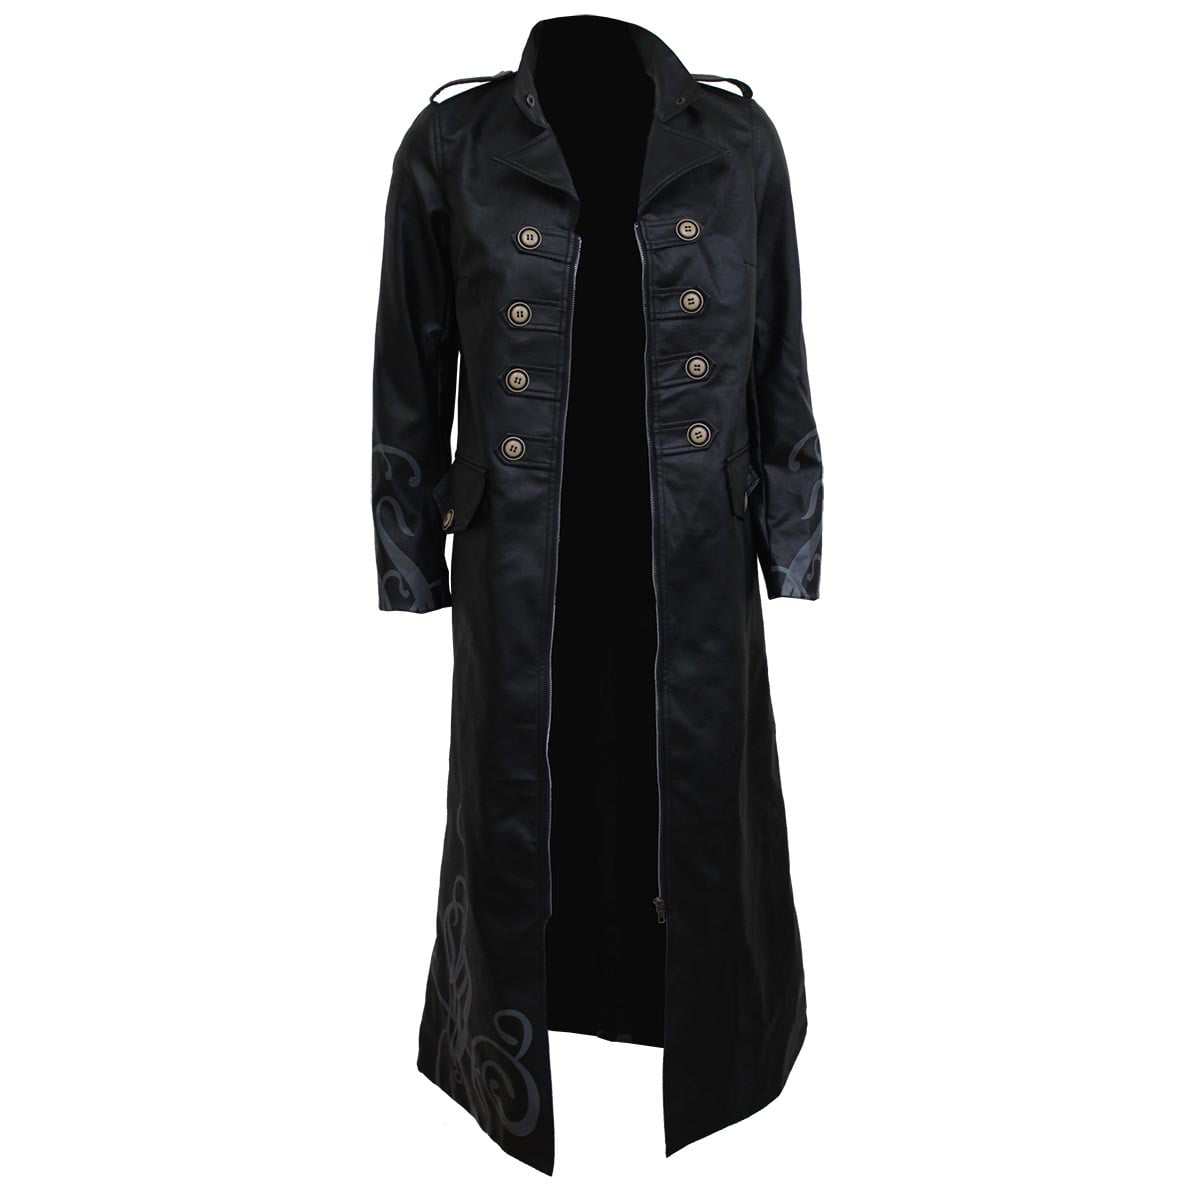 Spiral - Spiral Direct JUST TRIBAL - Gothic Trench Coat PU-Leather ...